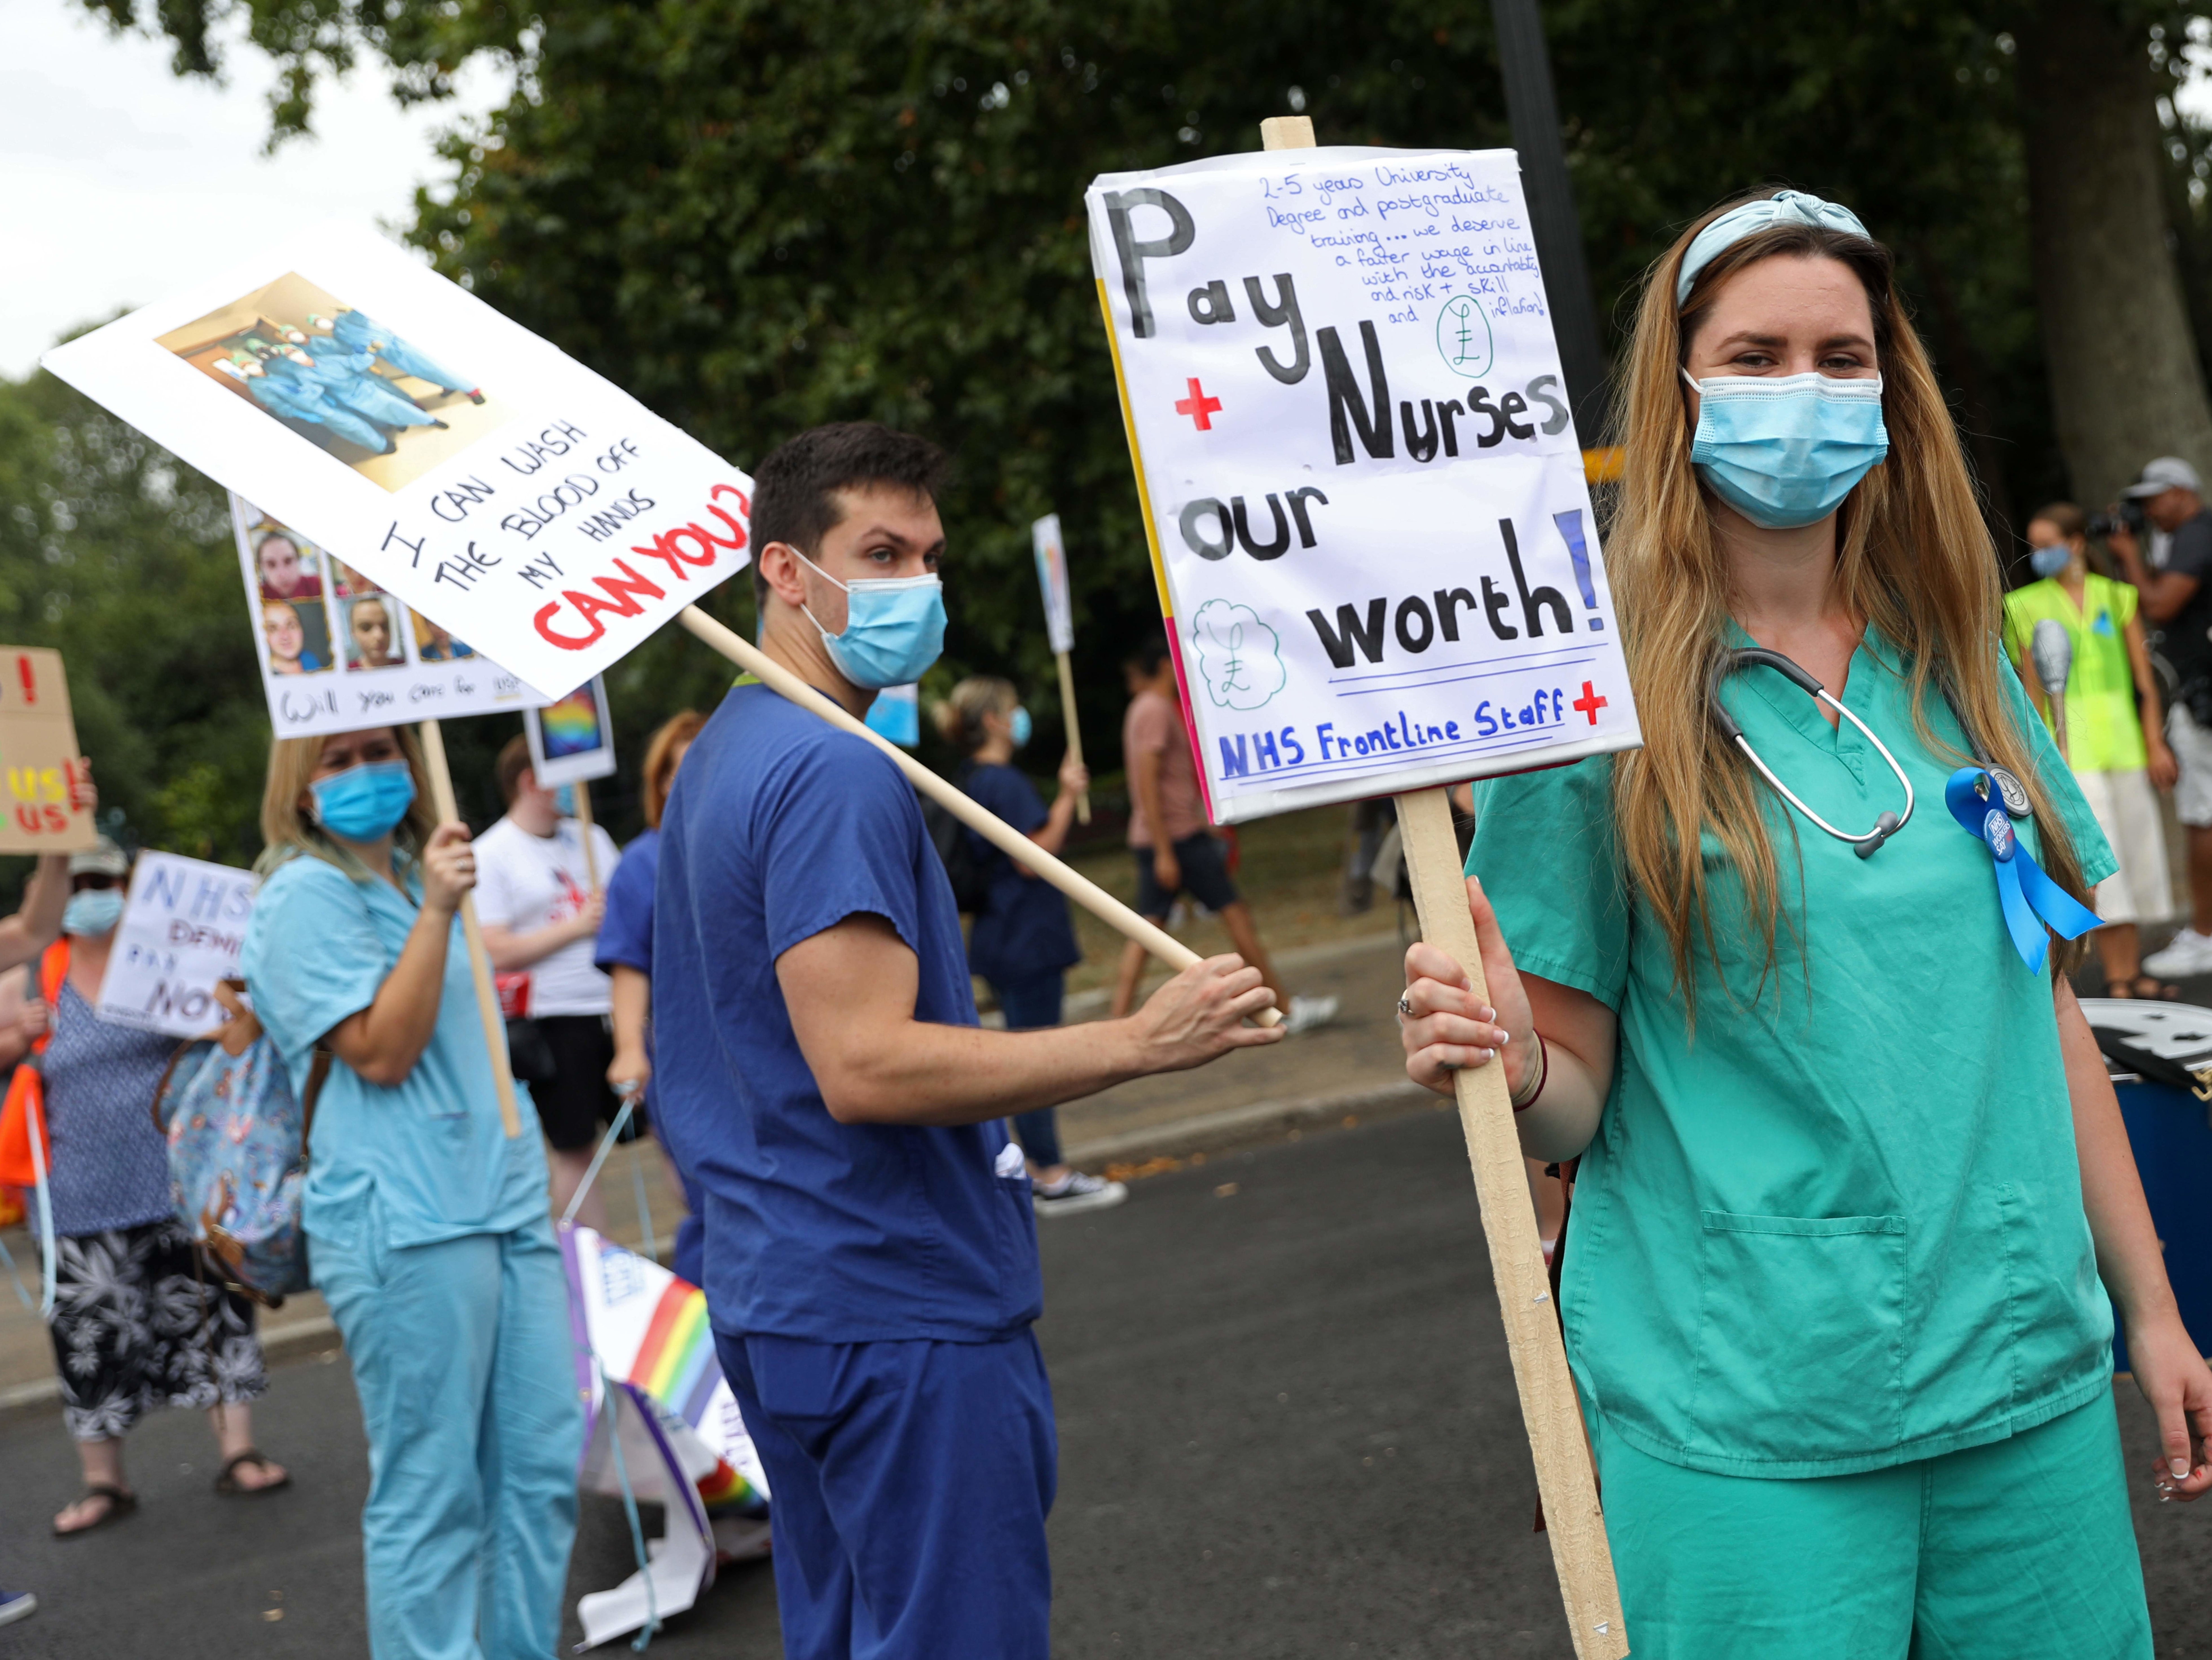 NHS workers demand pay increases at a protest in London, 2020